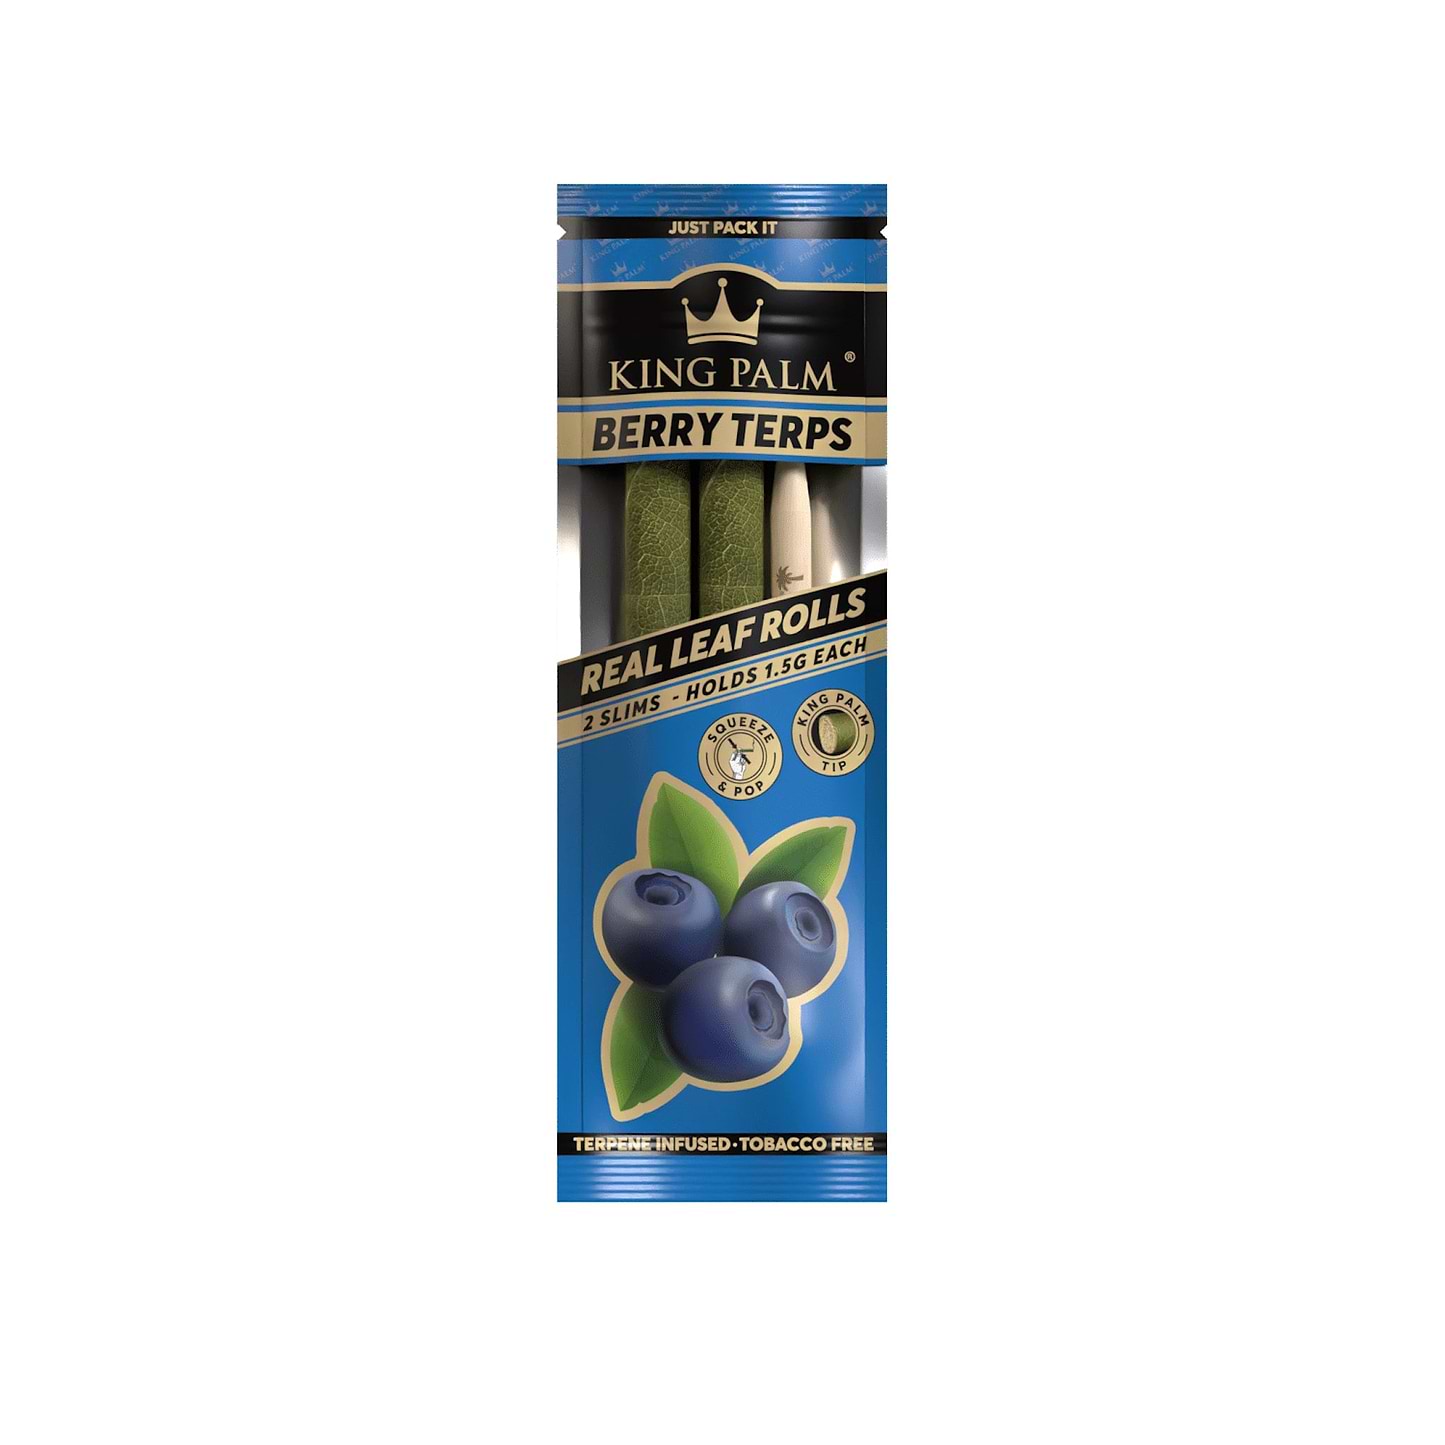 King Palm Slims - 2 Pack